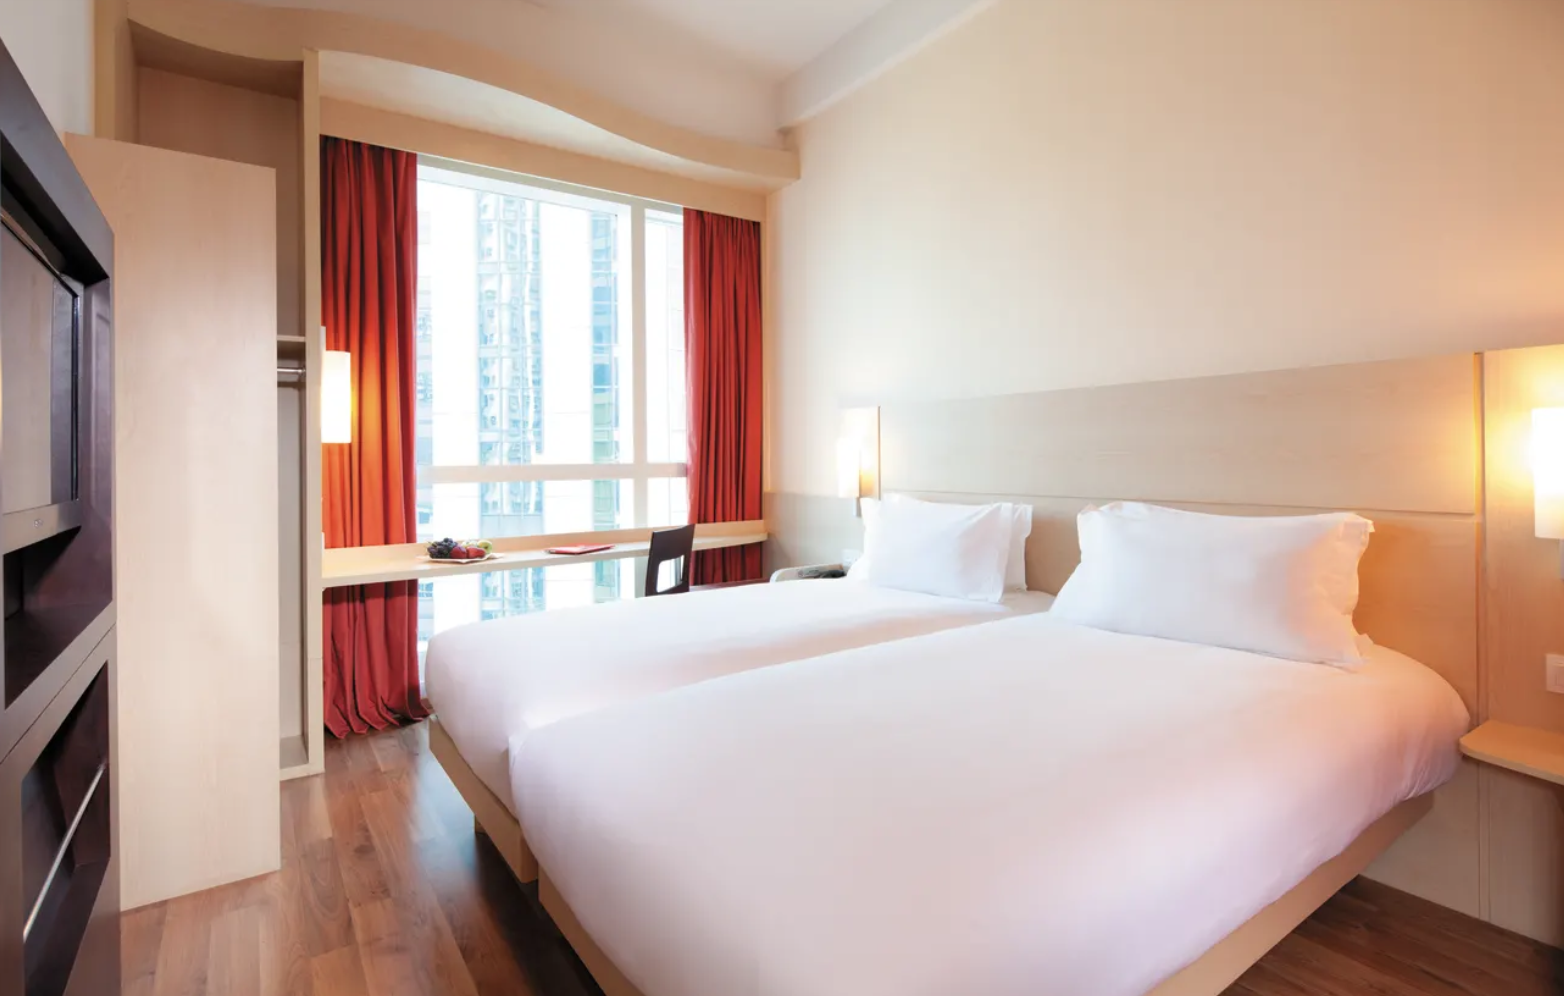 Ibis Hong Kong Central & Sheung Wan Hotel，宜必思香港中上環酒店- 城景客房，staycation，酒店staycation